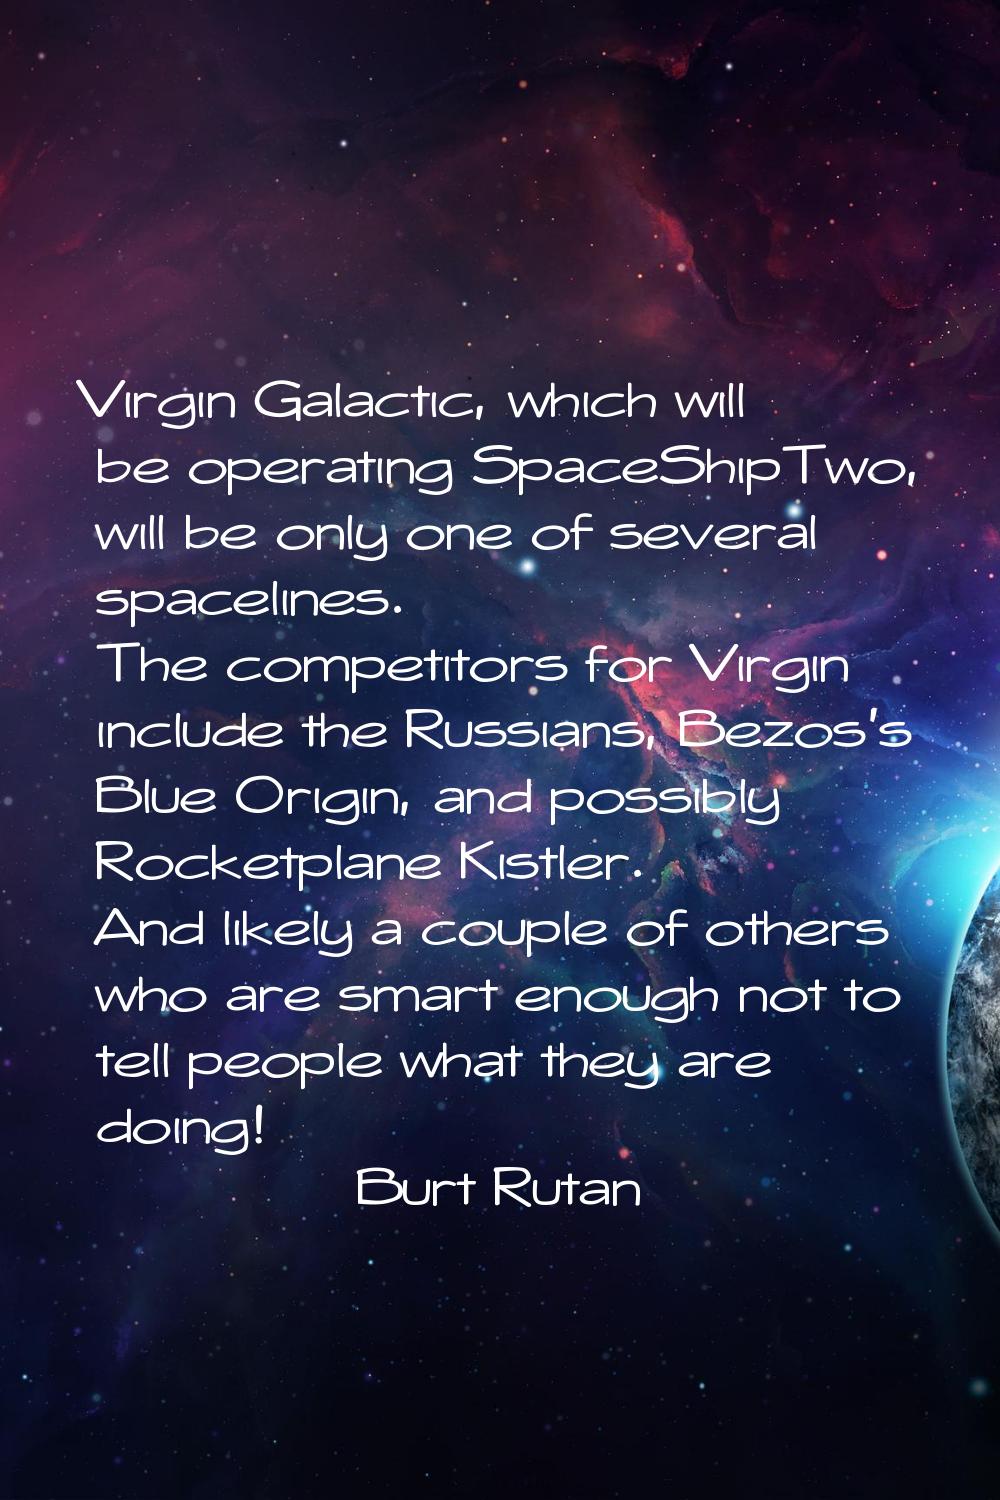 Virgin Galactic, which will be operating SpaceShipTwo, will be only one of several spacelines. The 